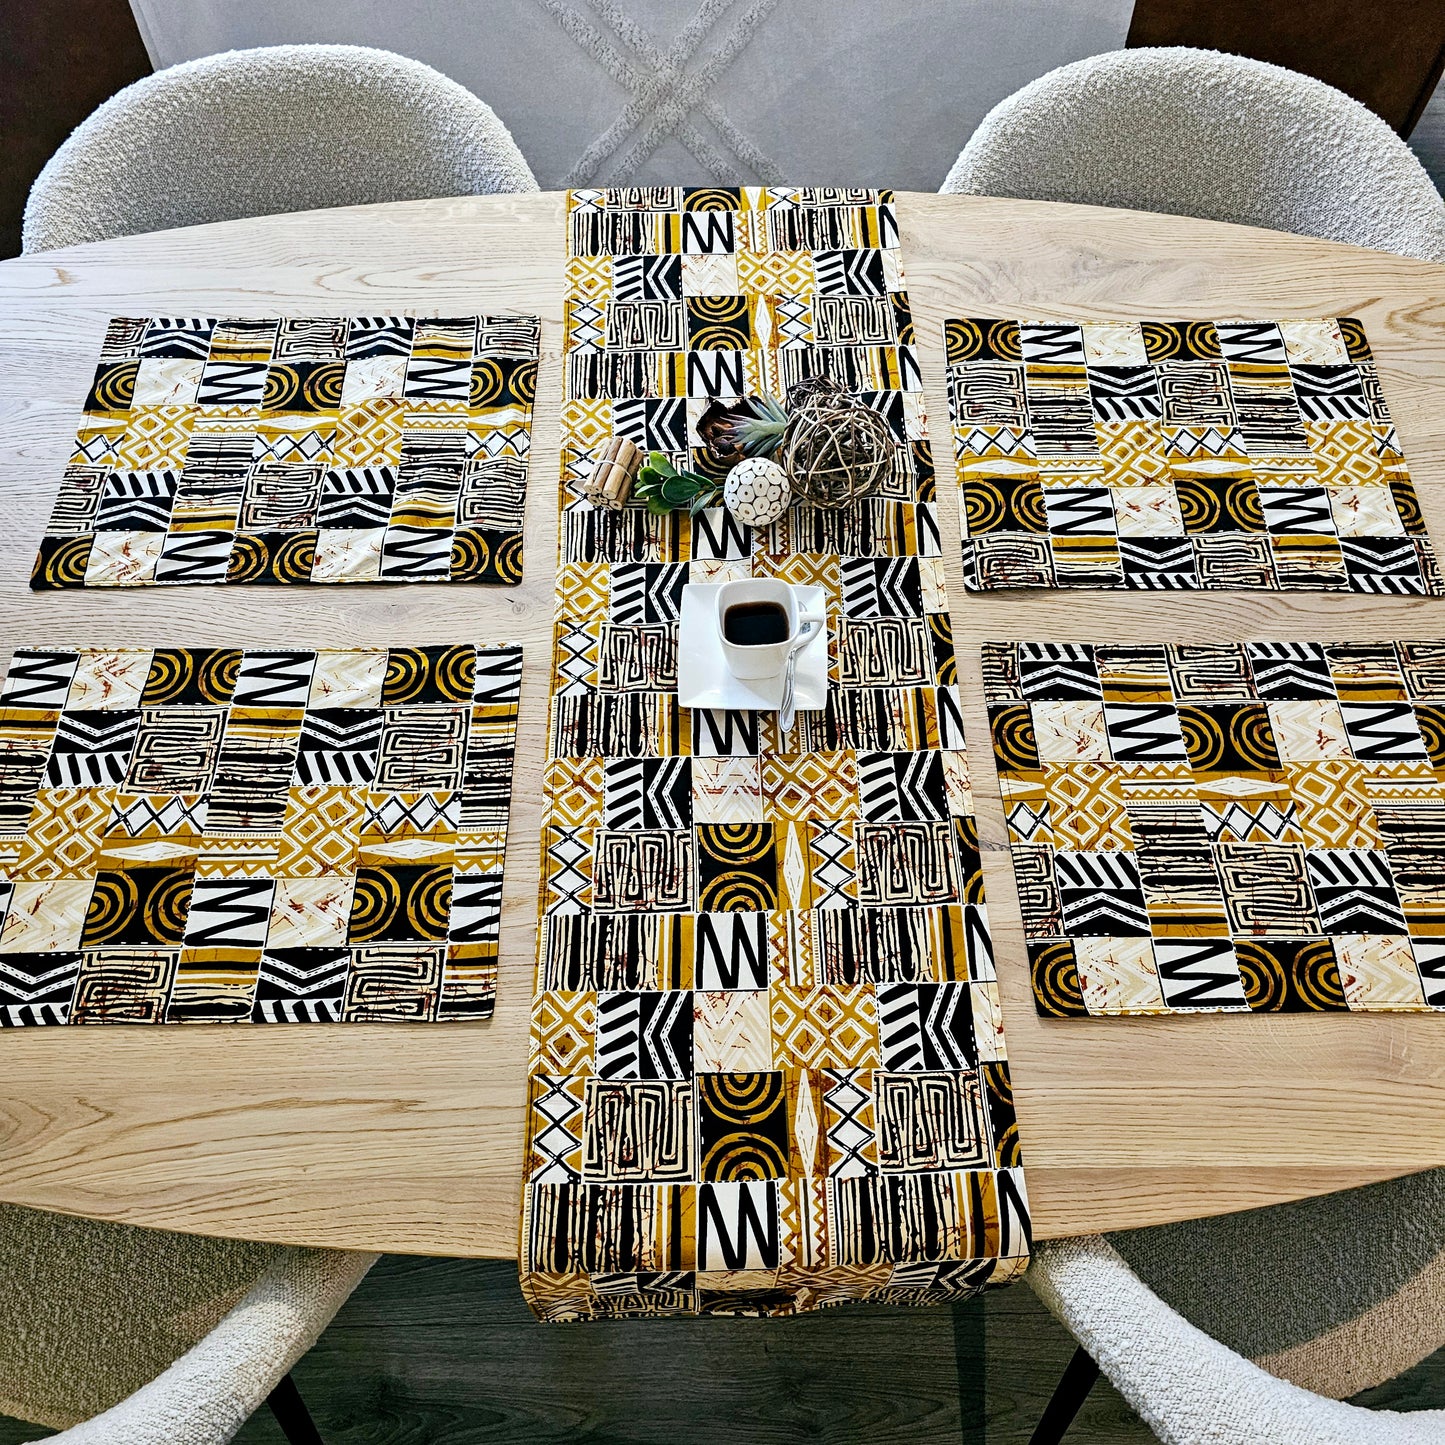 Handmade Table Runner and Set of 8 Placemats | African Print "Mudcloth" Bogolan Inspired Print Made from 100% African Print Fabric